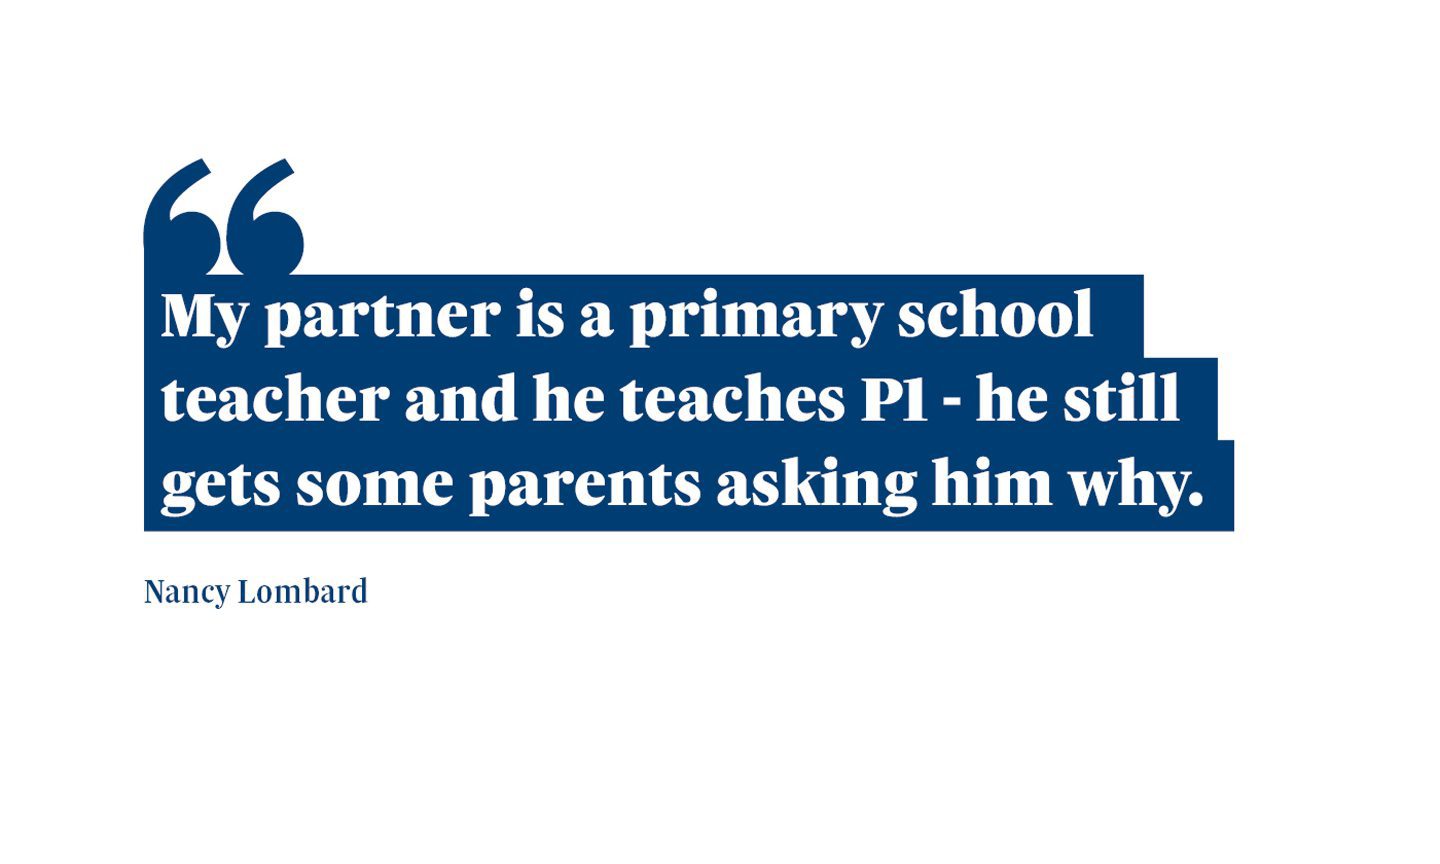 A quote from Nancy Lombard saying: “My partner is a primary school teacher and he teaches P1 - he still gets some parents asking him why.